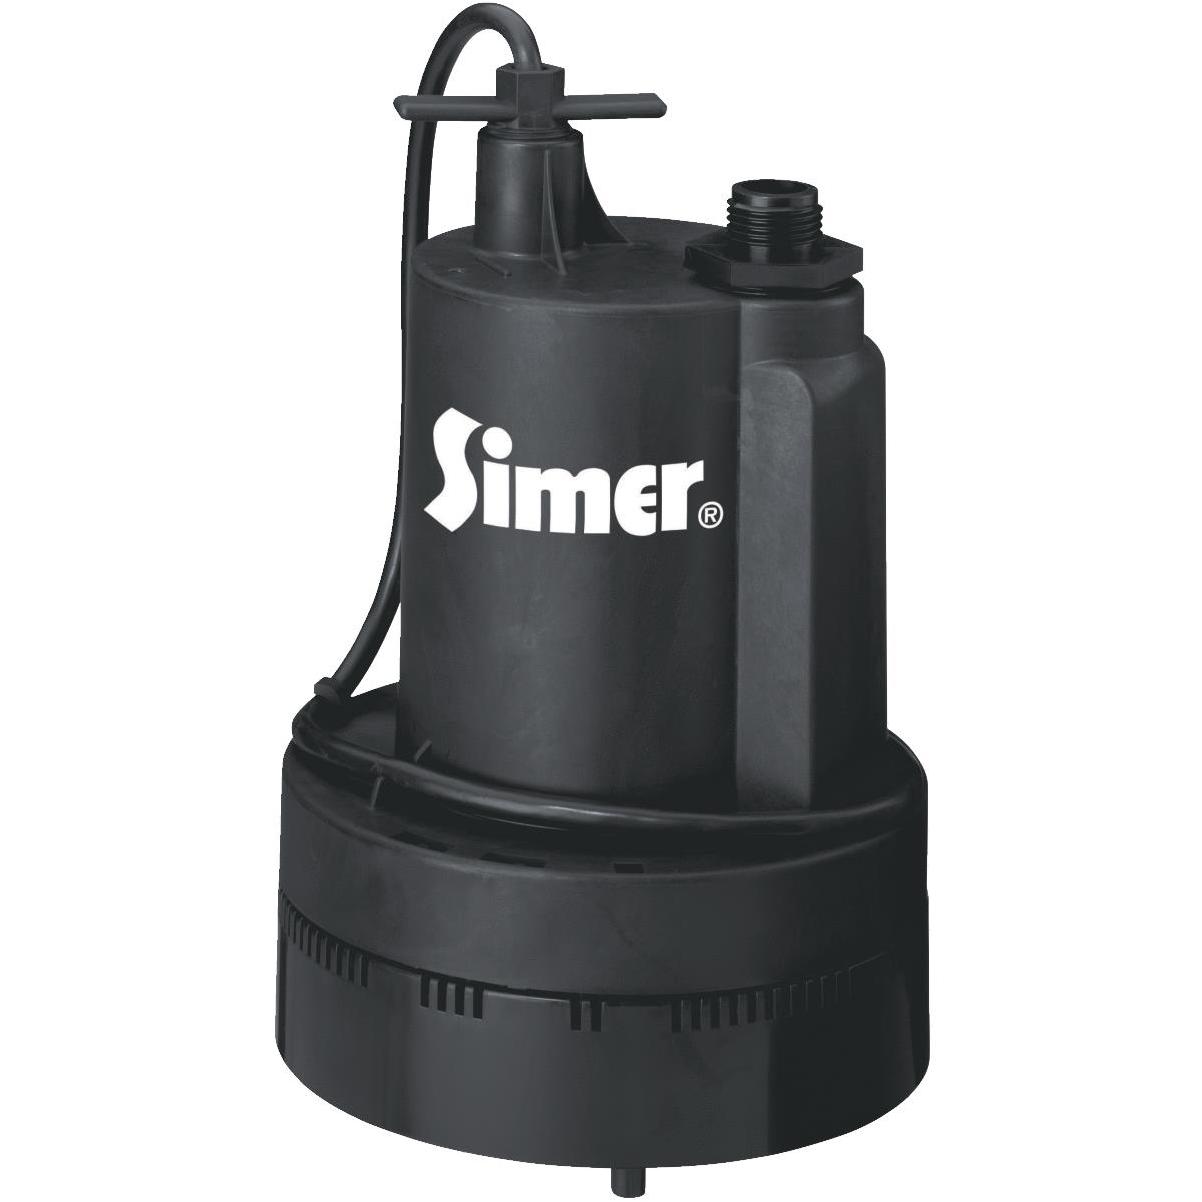 Black+Decker 1/6 HP Submersible Water/Utility Pump, Pumps up to 2000 GPH 